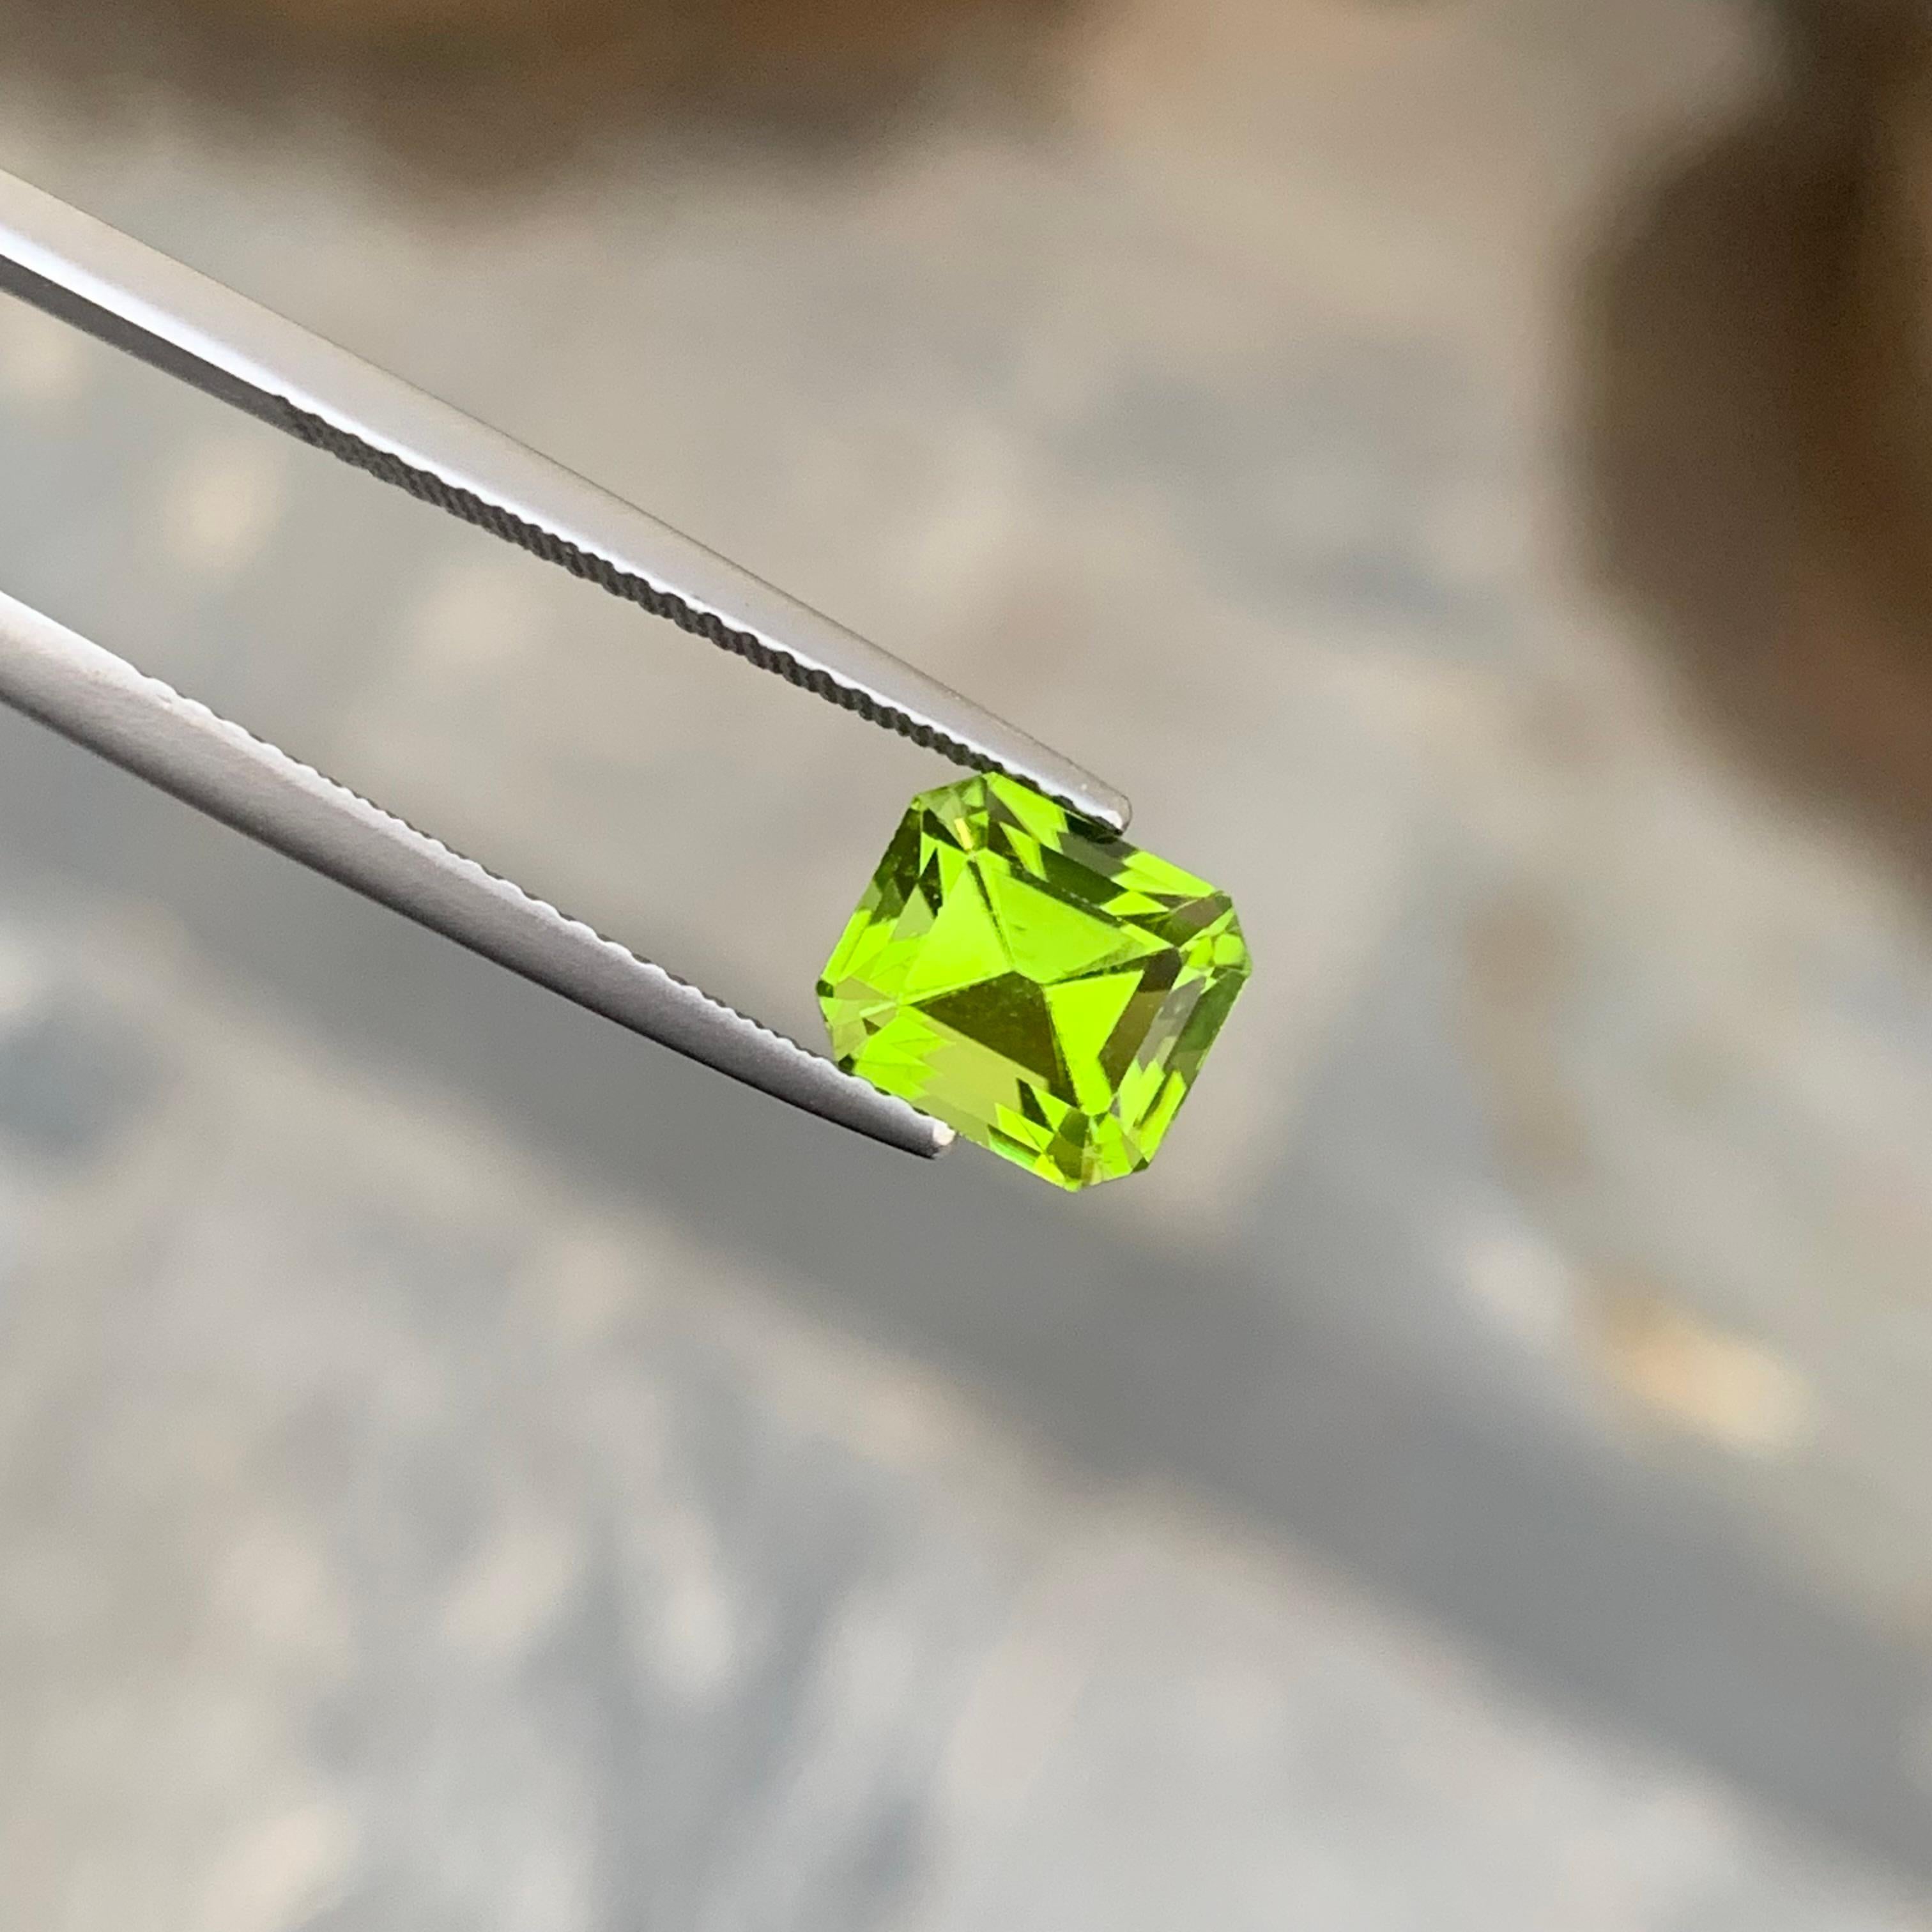 Gemstone Type : Peridot
Weight : 2.70 Carats
Dimensions : 7.7x6.9x6.2 mm
Origin : Suppat Valley Pakistan
Clarity : Eye Clean
Certificate: On Demand
Color: Green
Treatment: Non
Shape: Emerald
It helps cure diseases related to lungs, breasts,